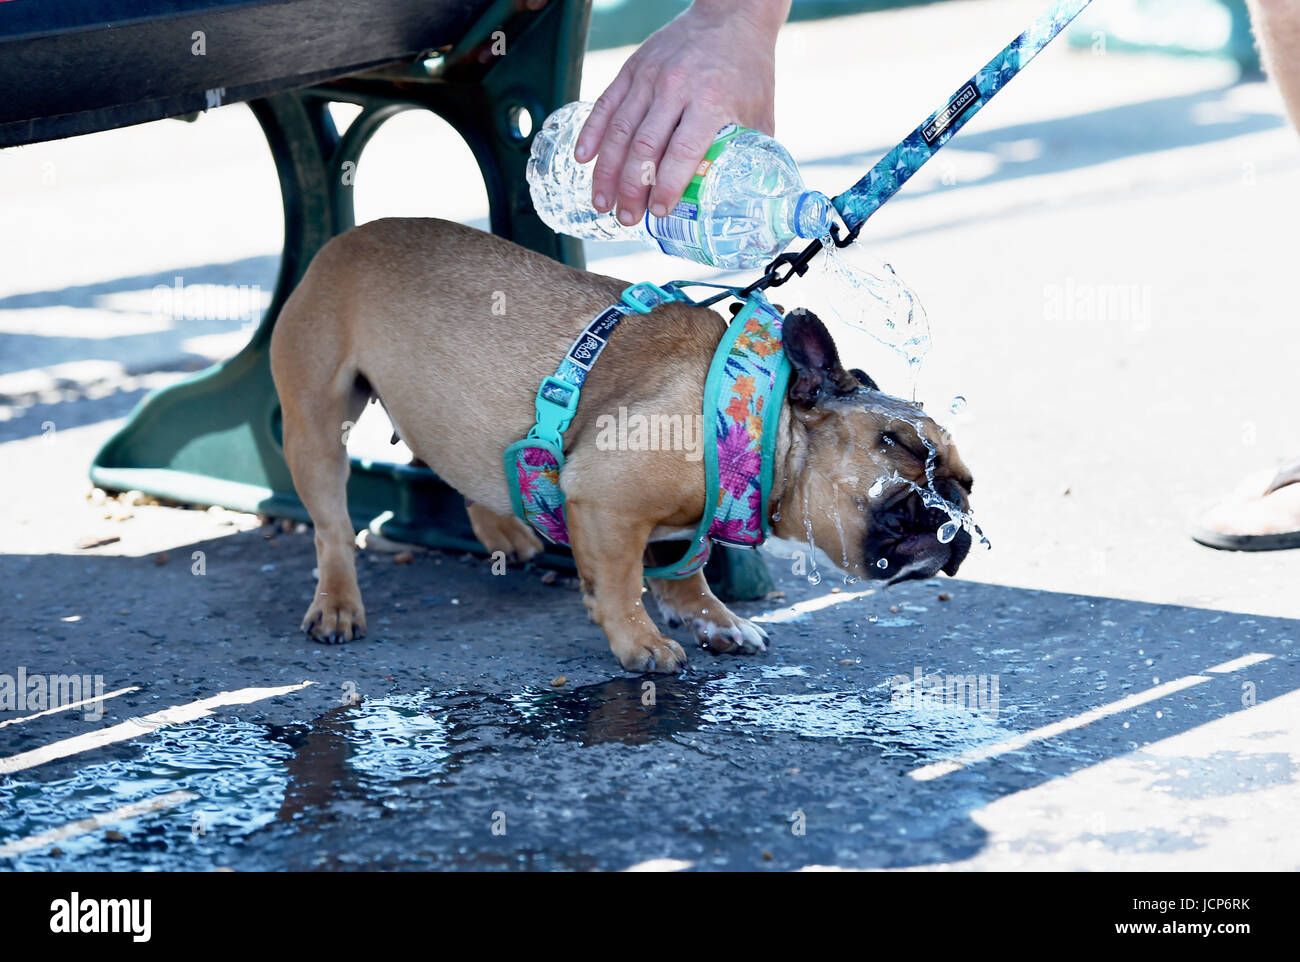 Brighton UK 17th June 2017 - This hot dog gets a cooling shower of water on Brighton seafront as hot weather sweeps across Britain this weekend with temperatures reaching the high 20s celsius Photograph taken by Simon Dack Stock Photo